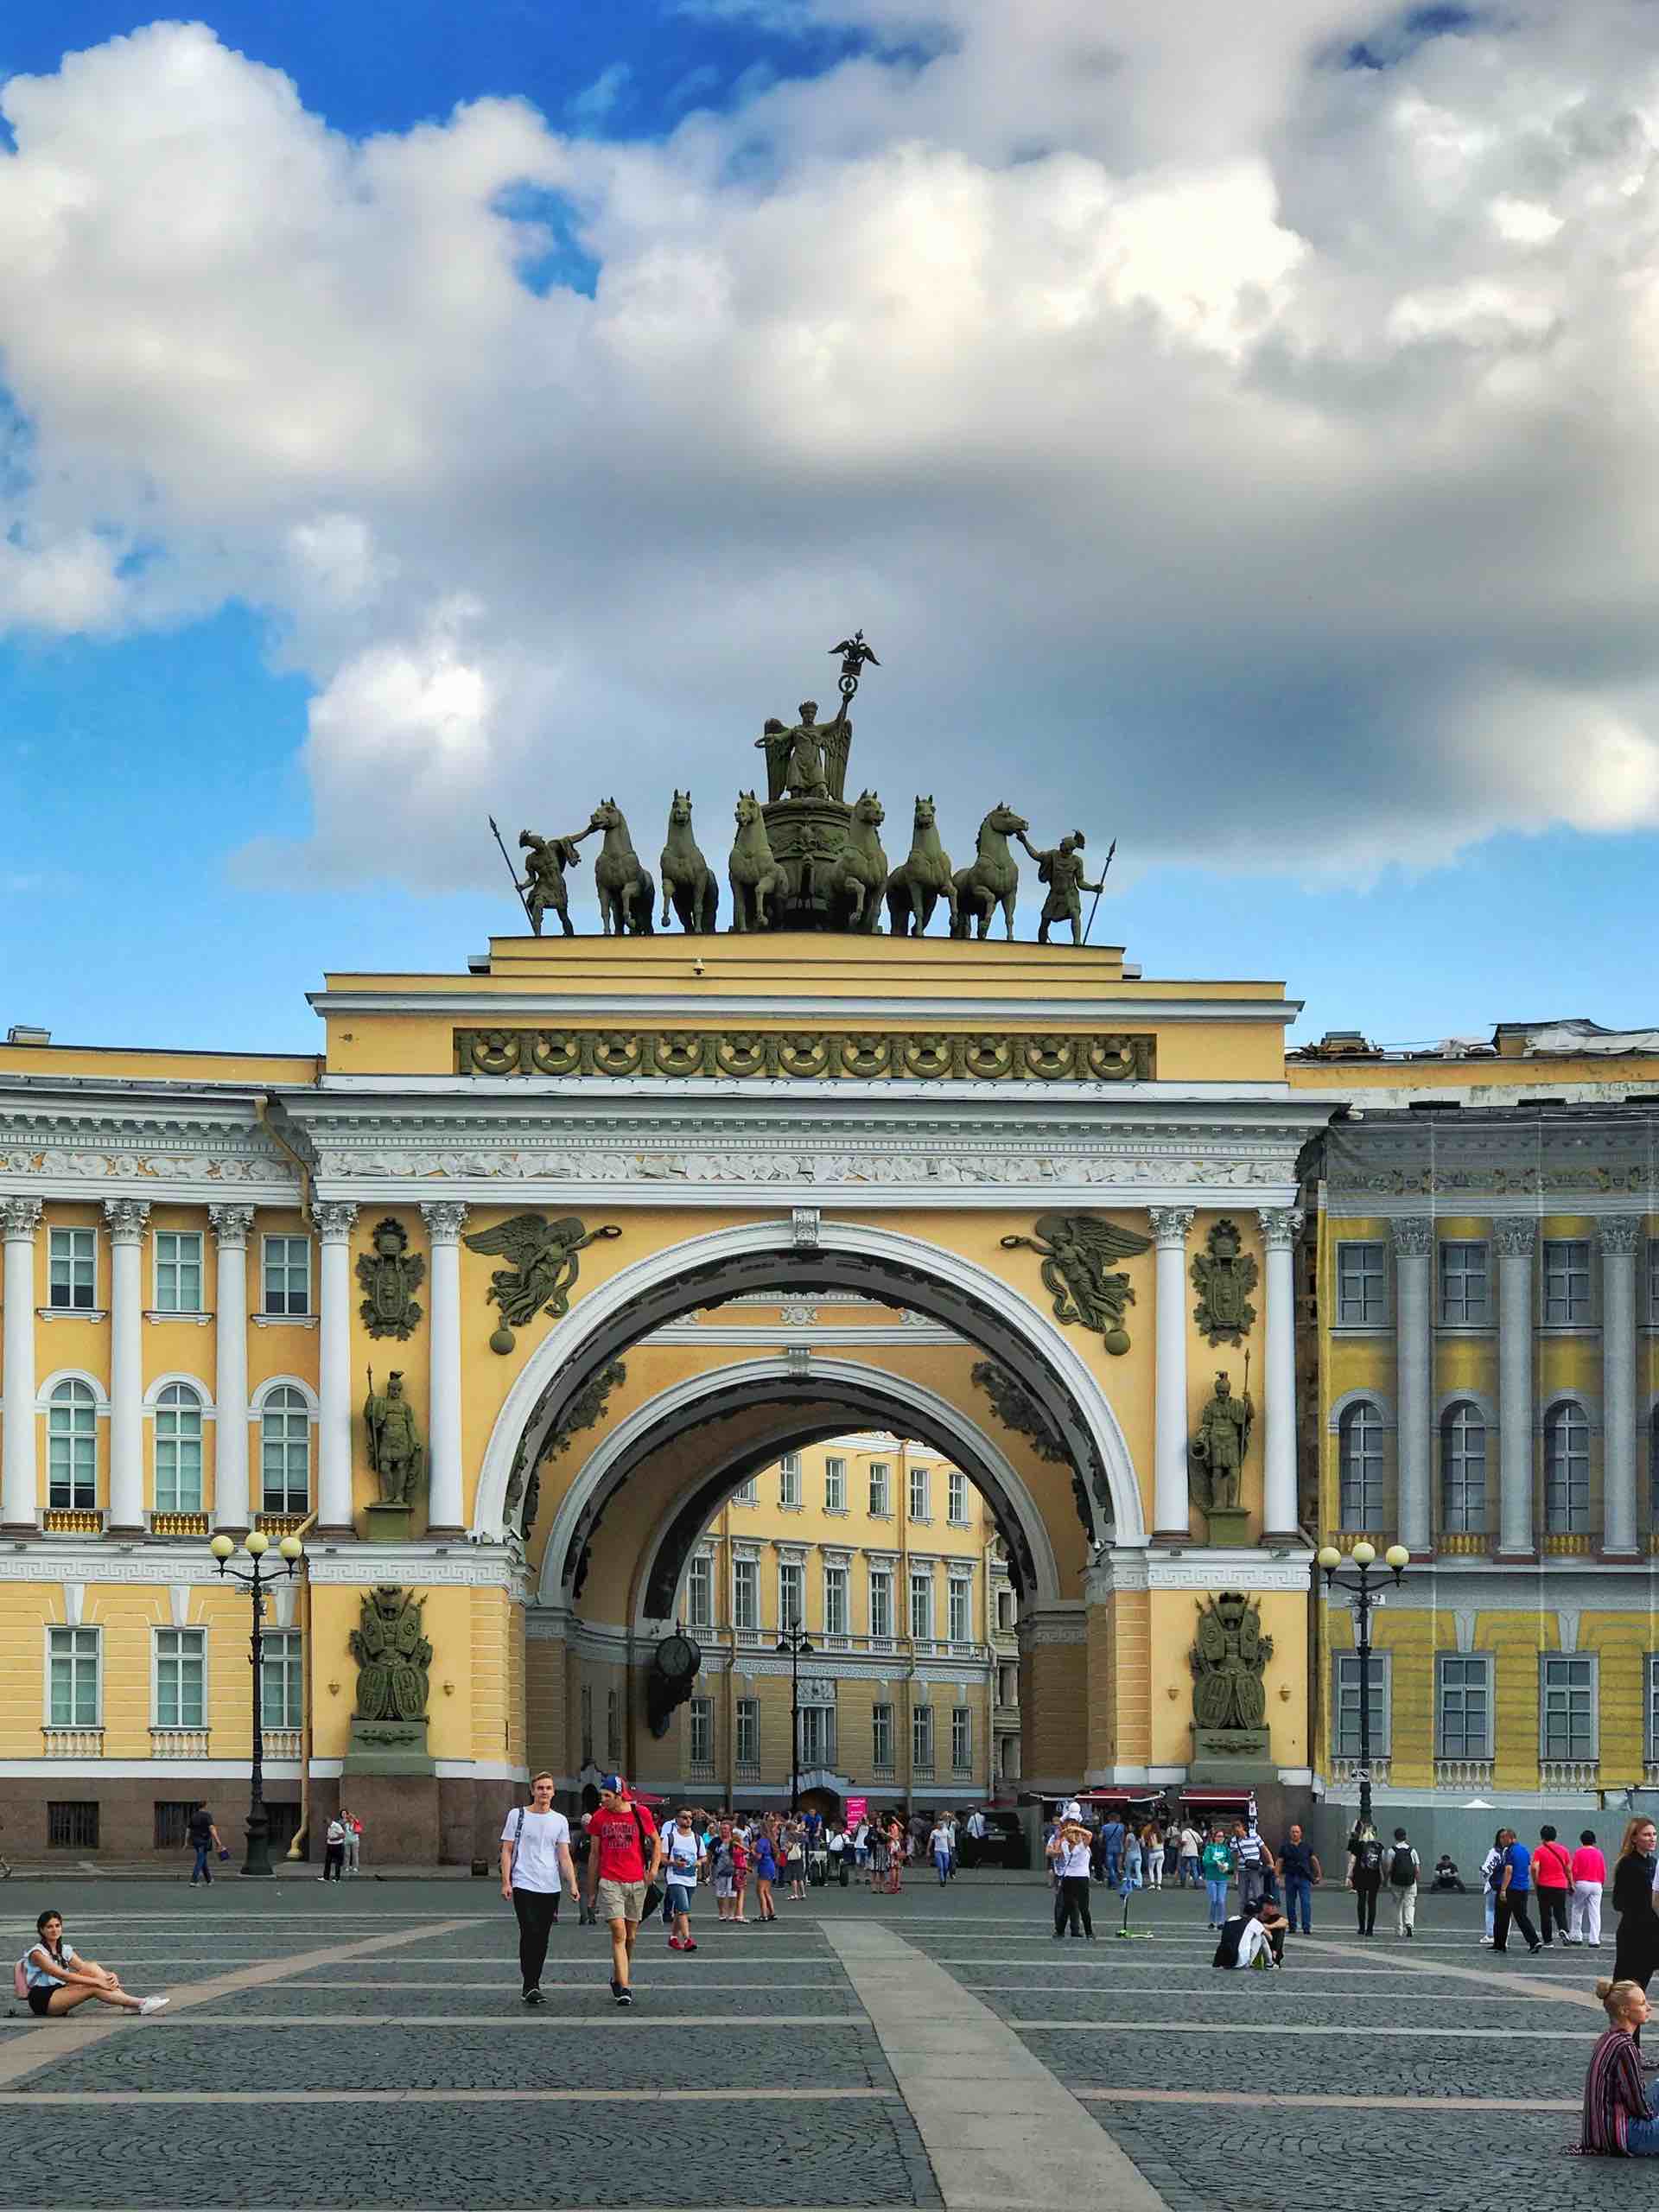 Arch of General Staff Building in St. Petersburg